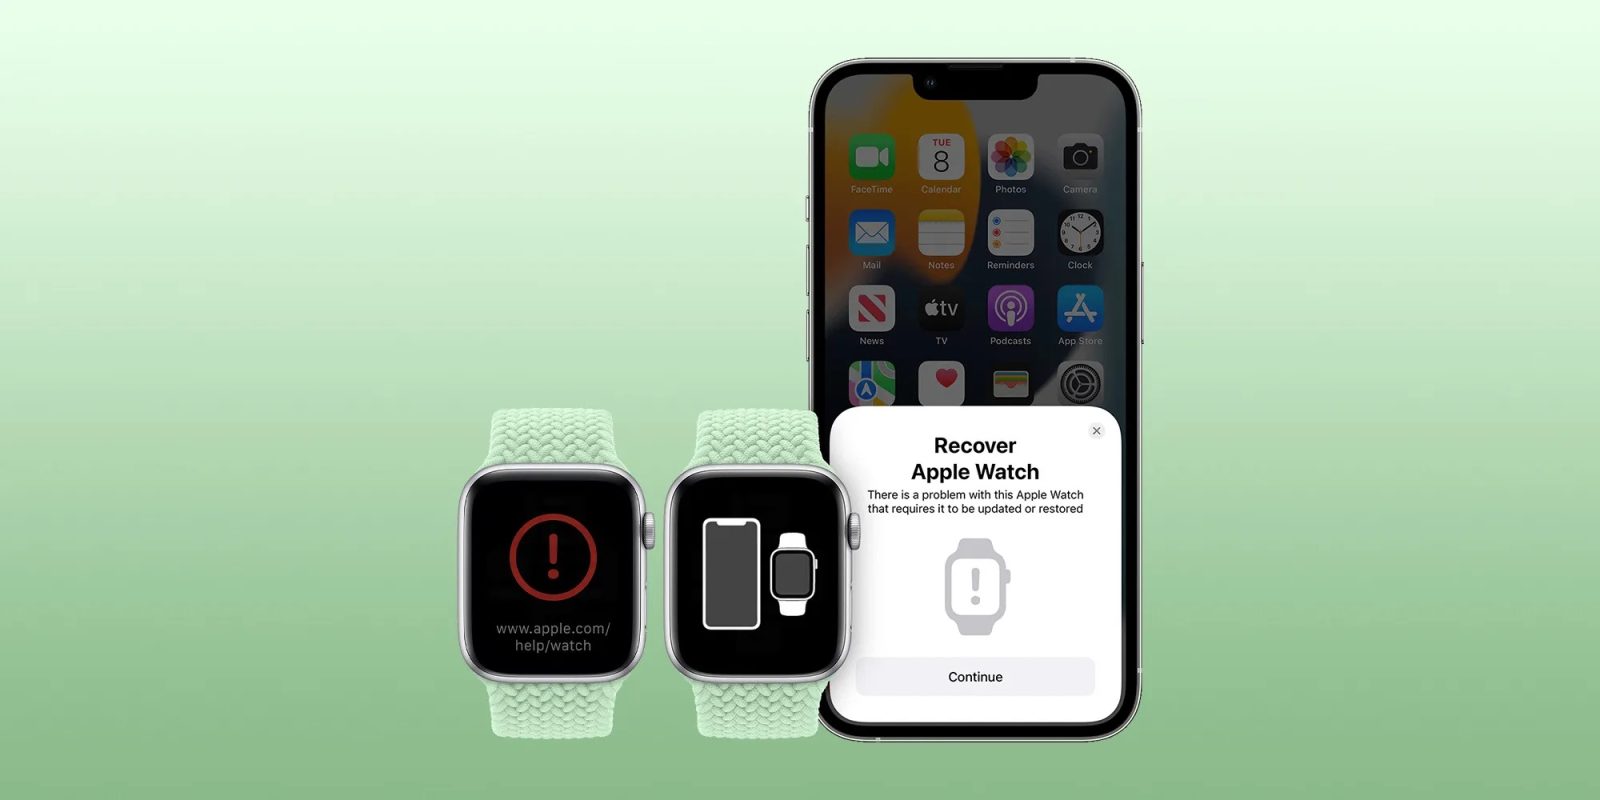 How to restore Apple Watch with iPhone